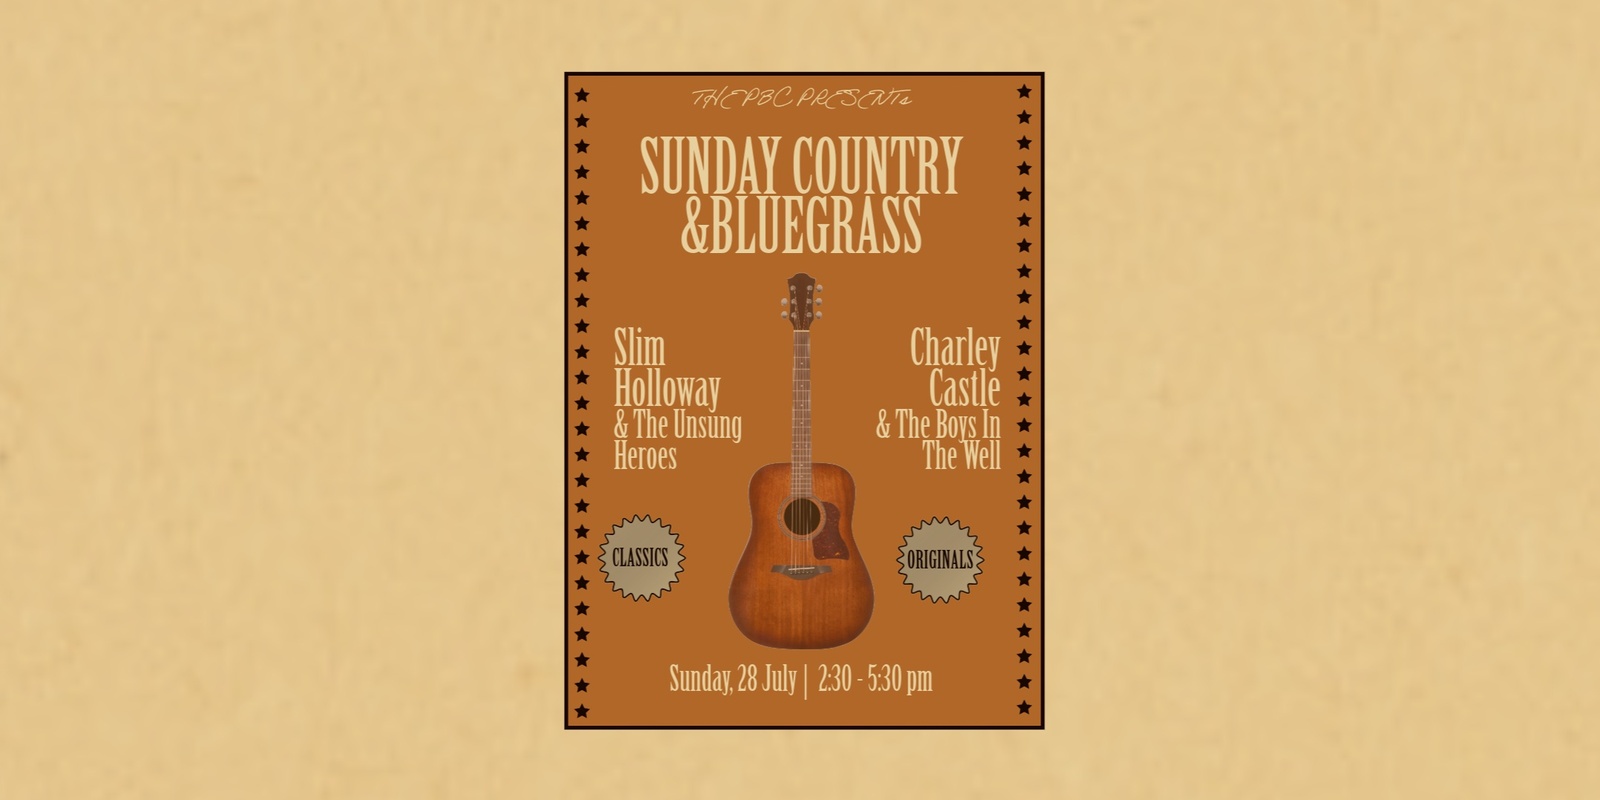 Banner image for Sunday country and bluegrass at the PBC